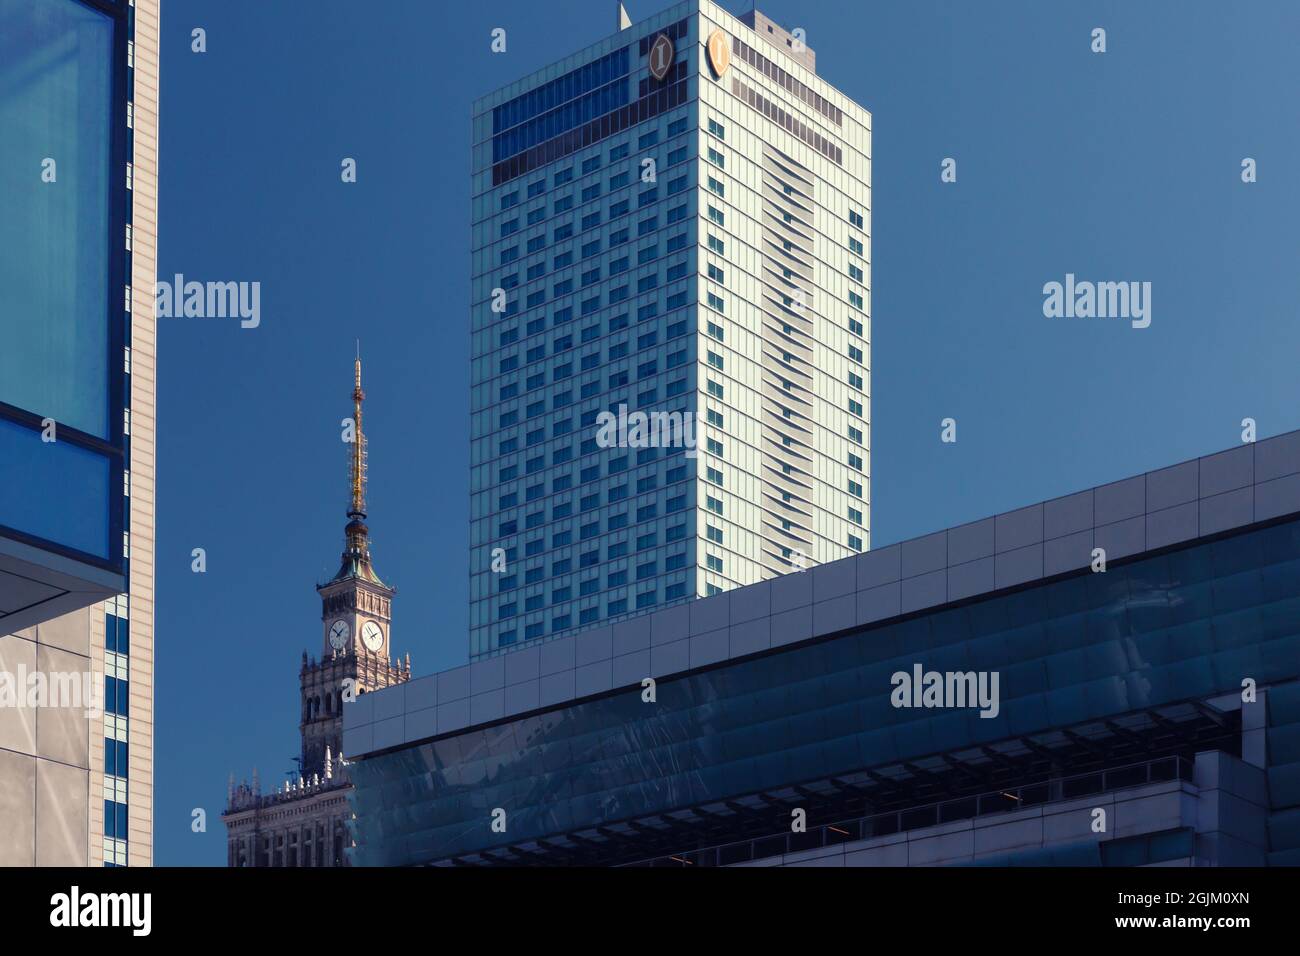 Warsaw, Poland - July 18th, 2021: Famous Palace of Culture and Science at the center of Warsaw surrounded by modern office buildings, Poland Stock Photo